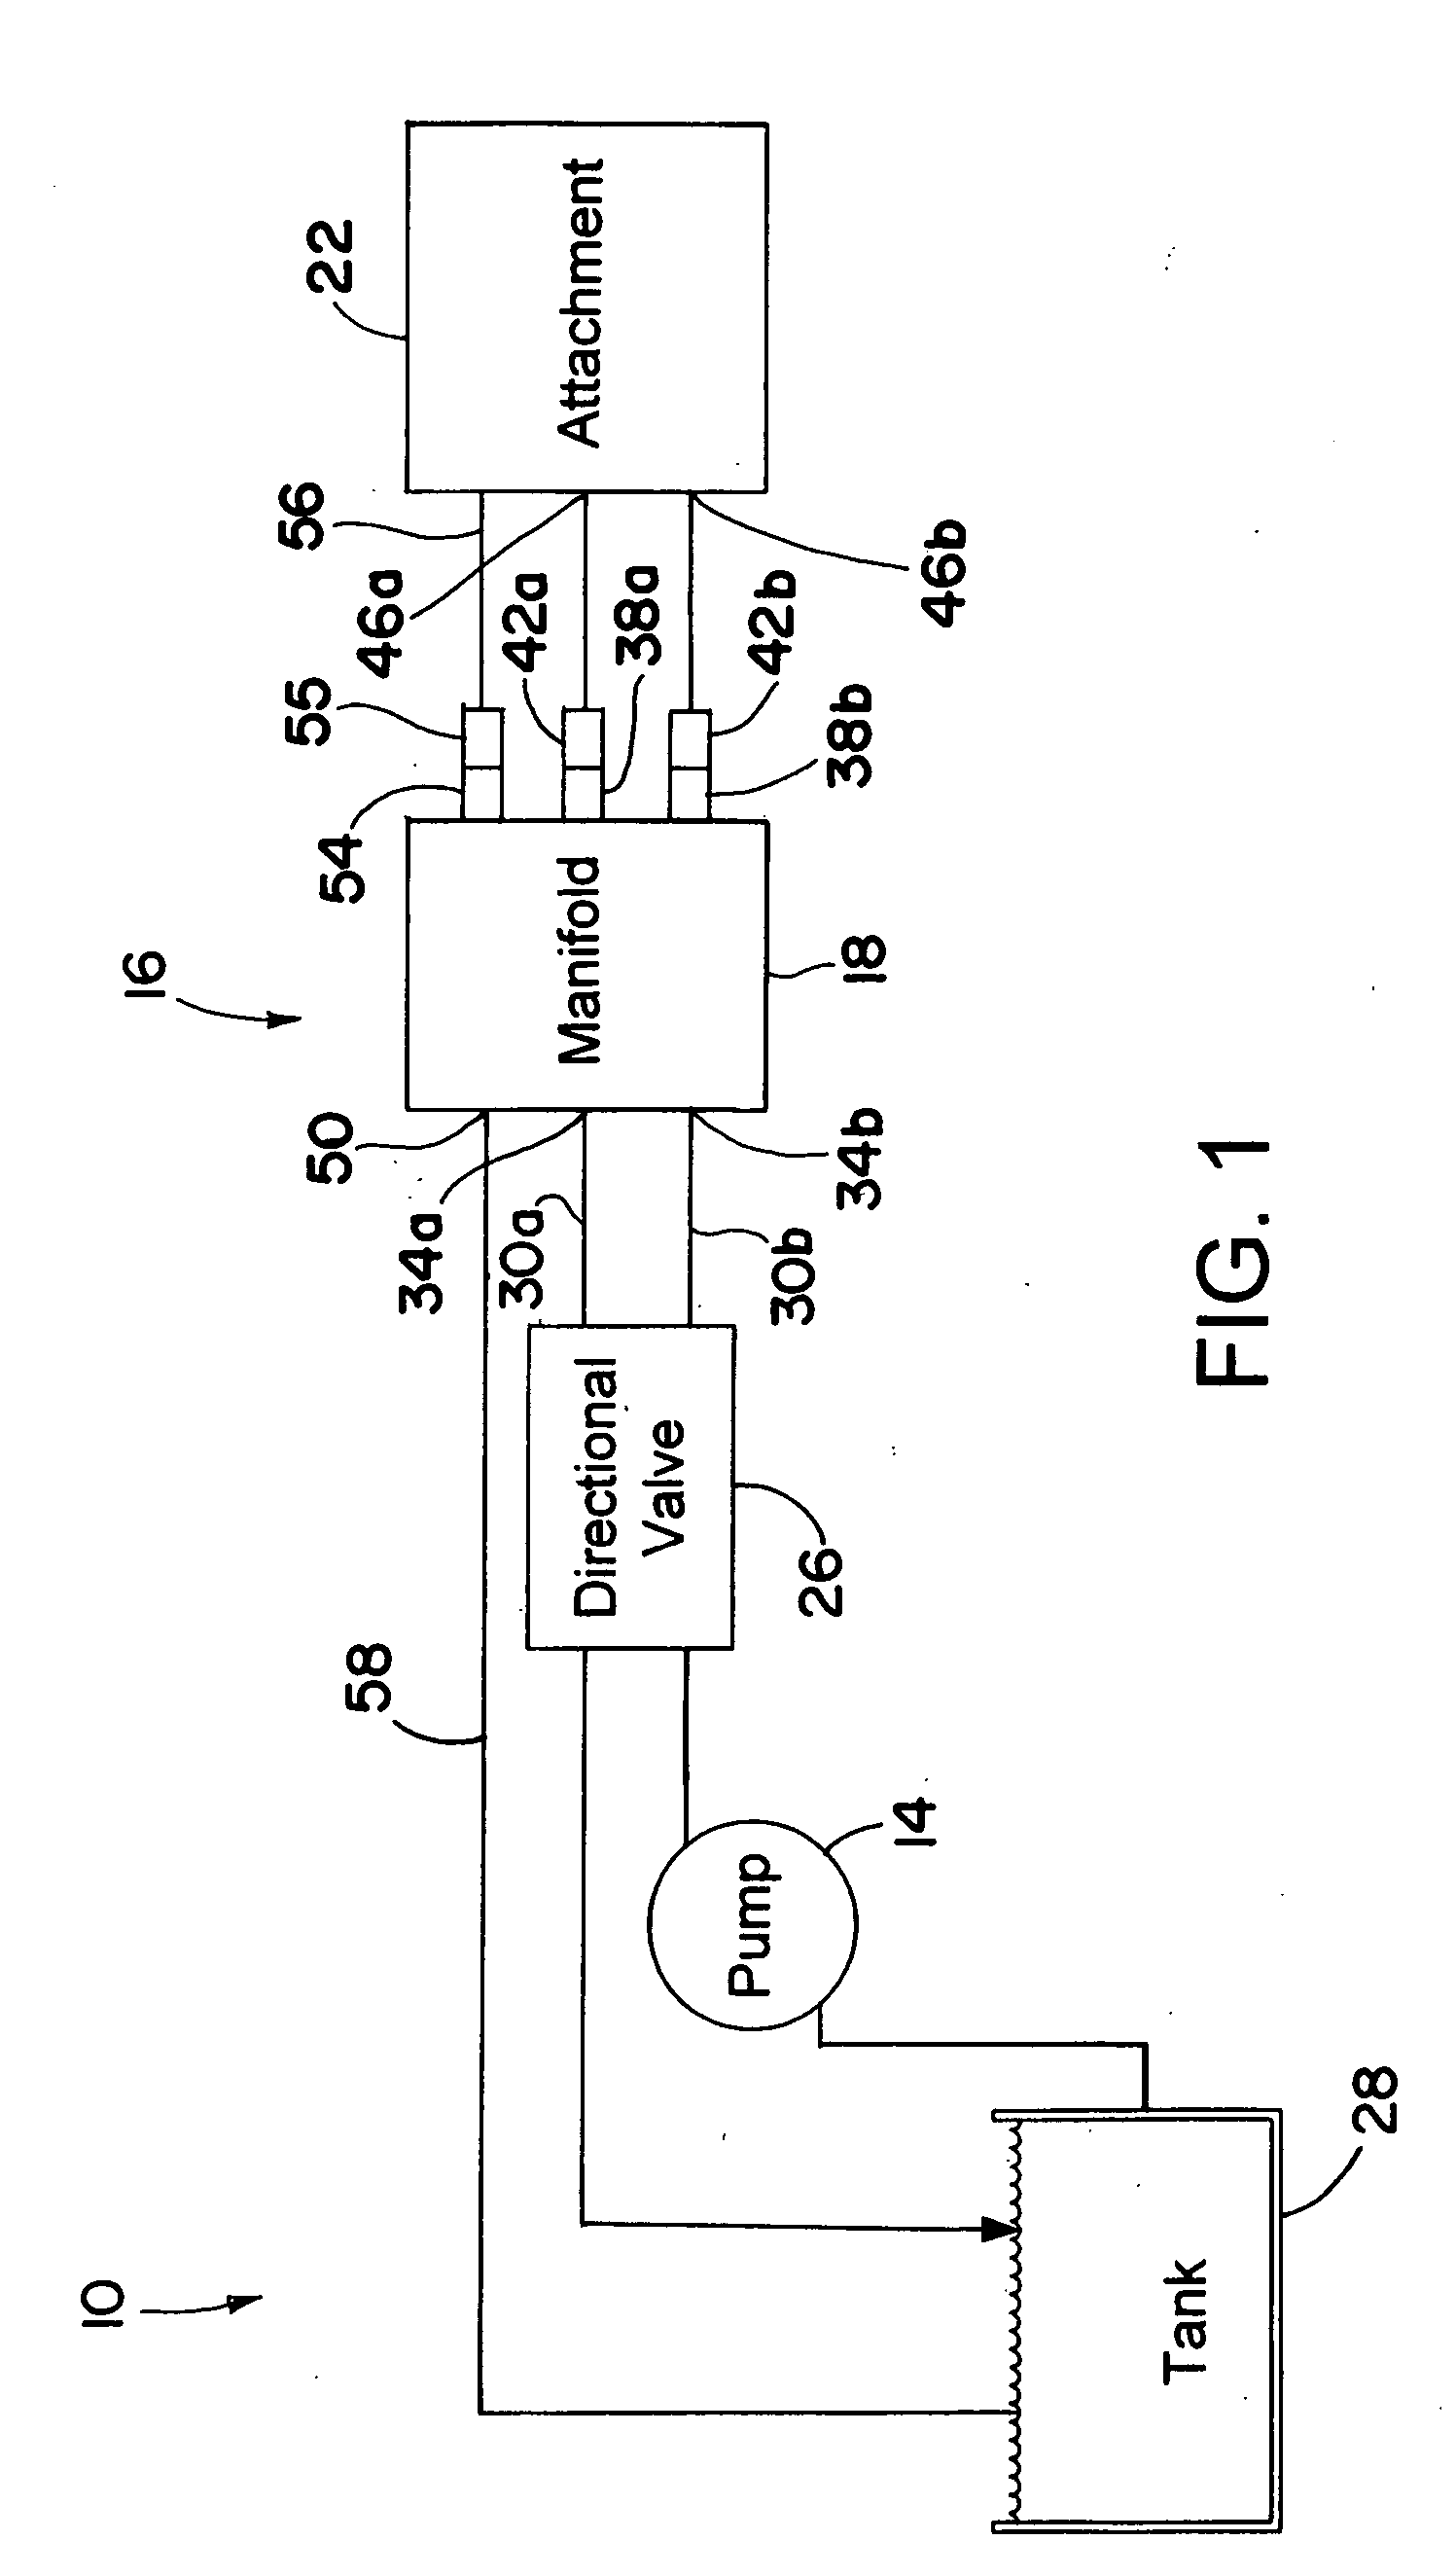 Pressure relieving coupler manifold with internal velocity fuse